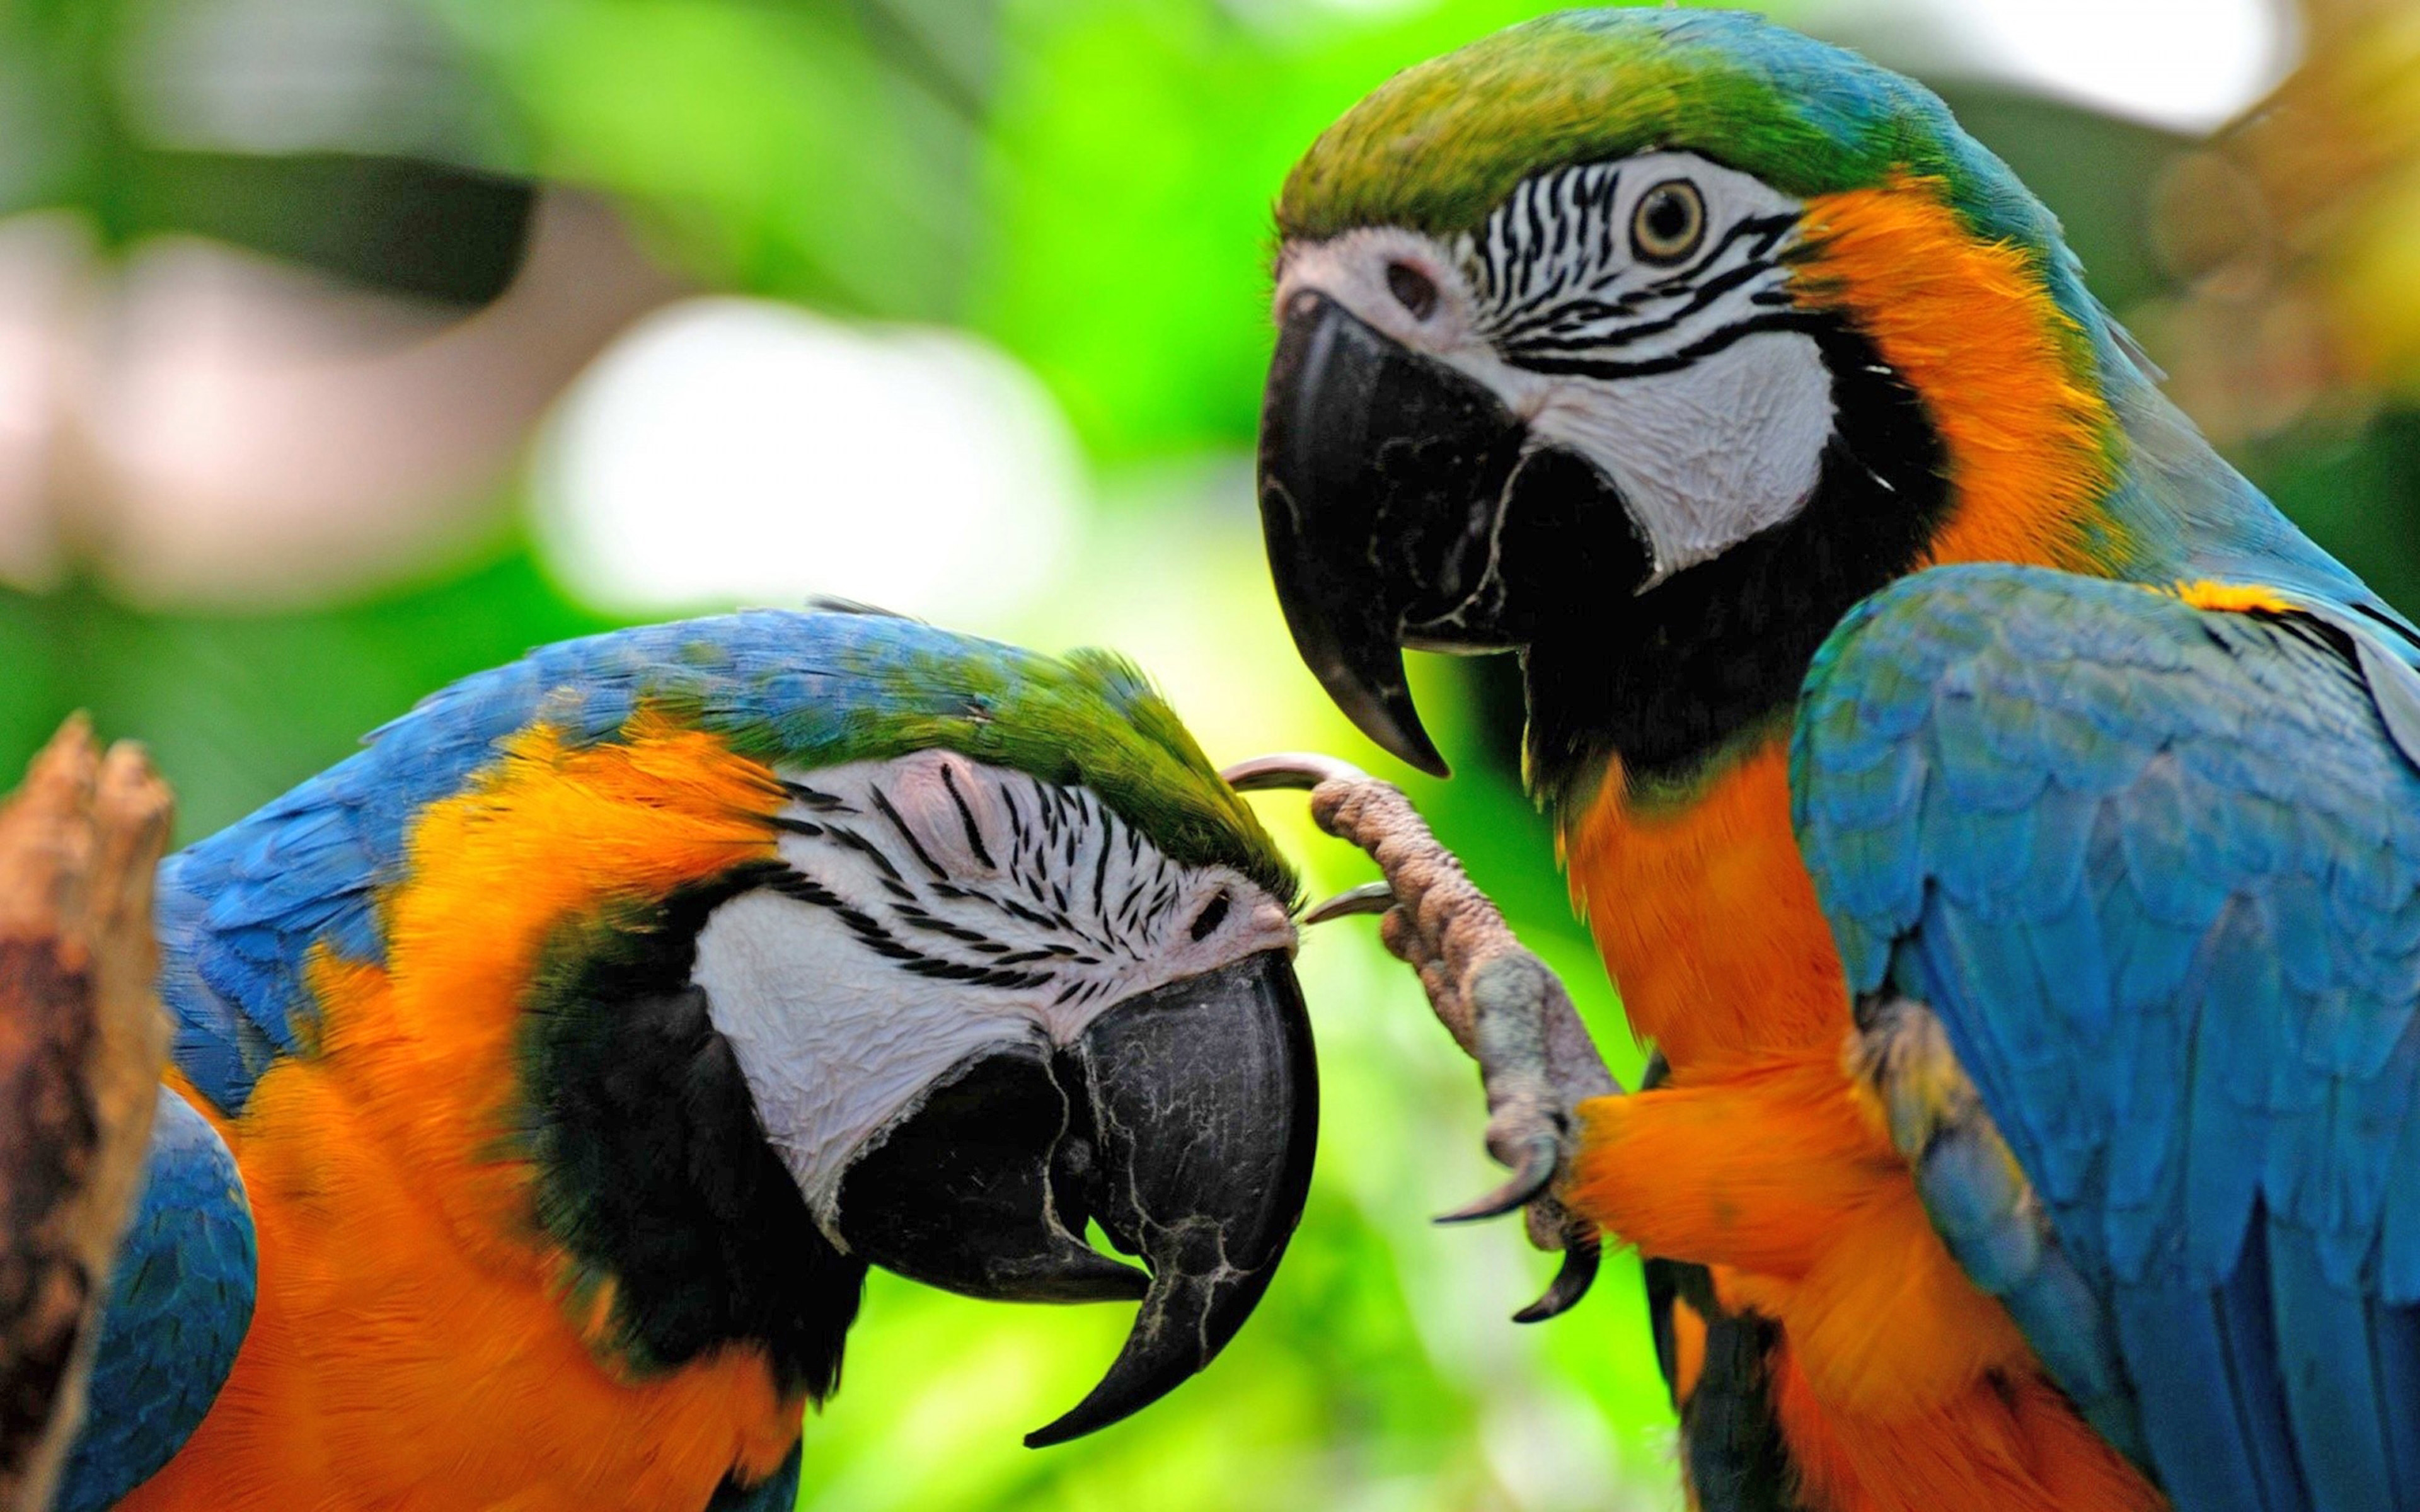 Two Colorful Parrots Fighting Hd Bird Wallpapers : Wallpapers13.com